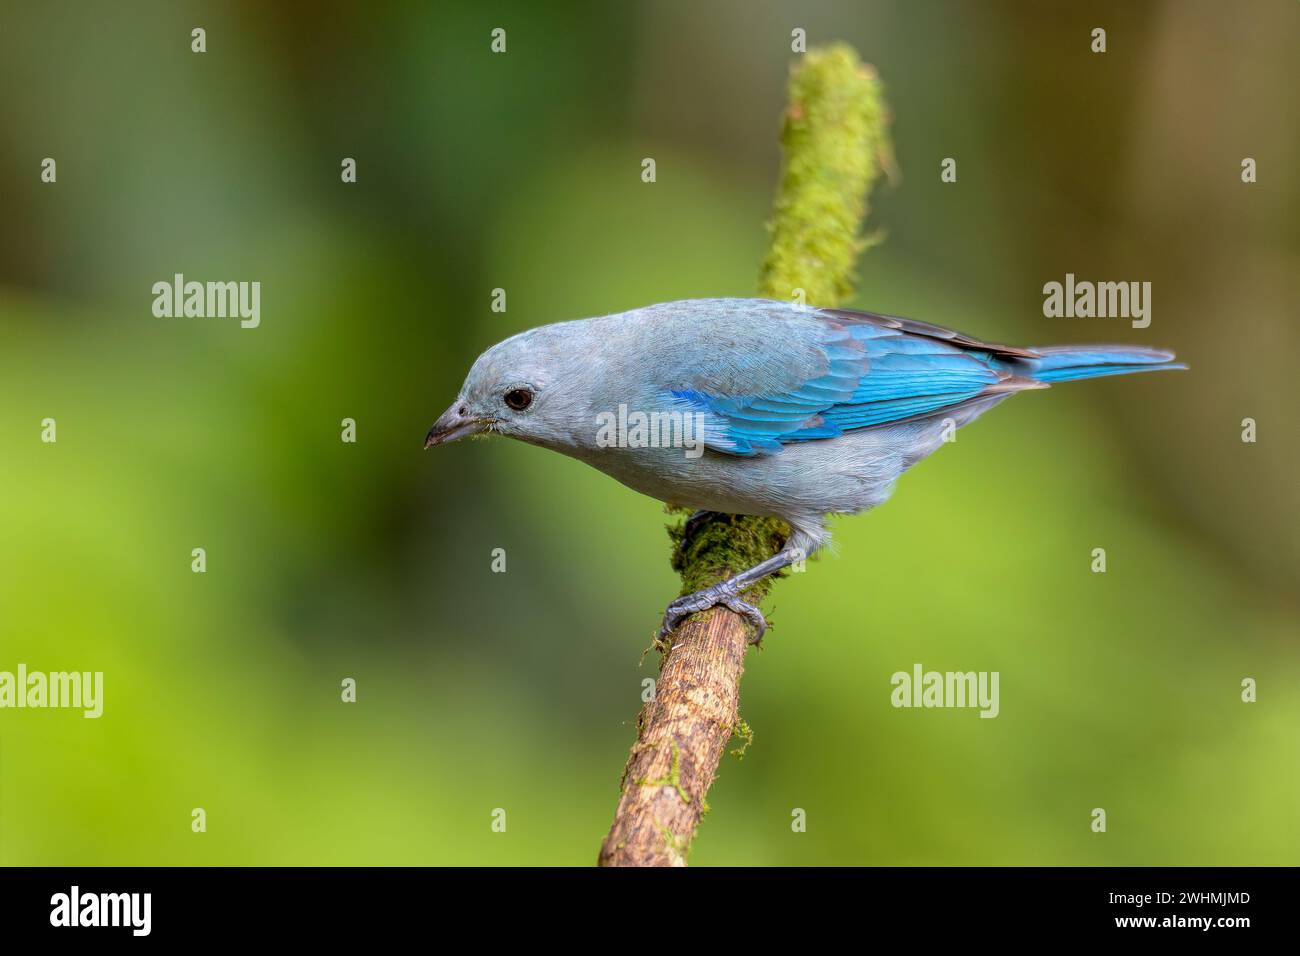 Blue-gray tanager, Thraupis episcopus, Costa Rica Stock Photo